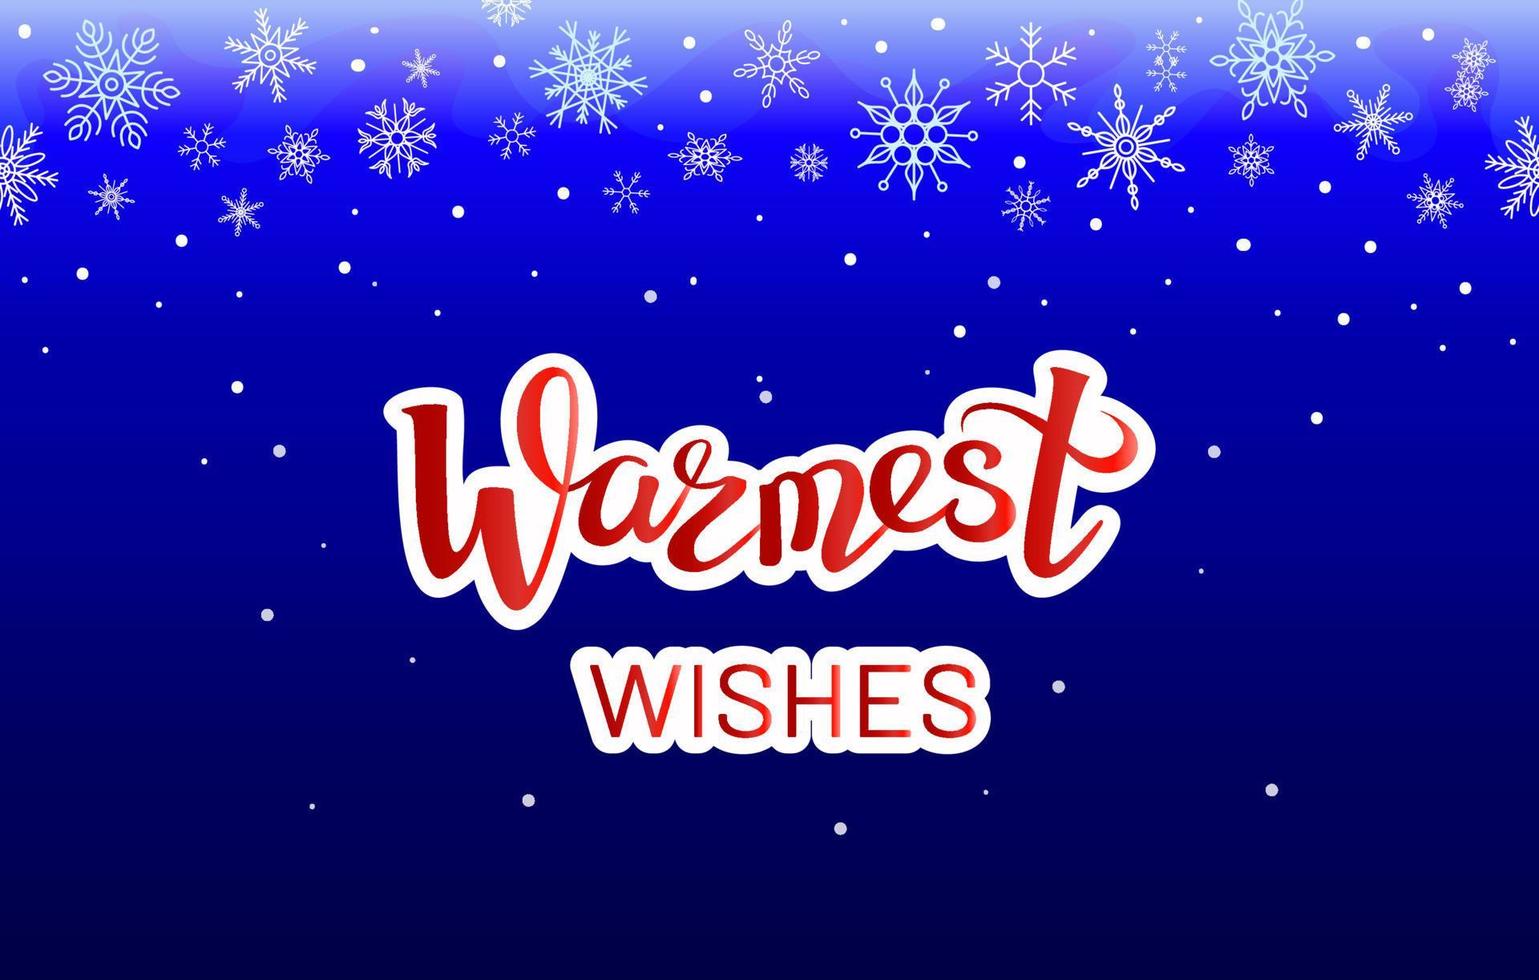 Warmest Wishes, lettering on blue seamless background with gradient and falling snowflakes. Holiday regards. Original editable retro design for packaging, mailing, distribution etc. vector